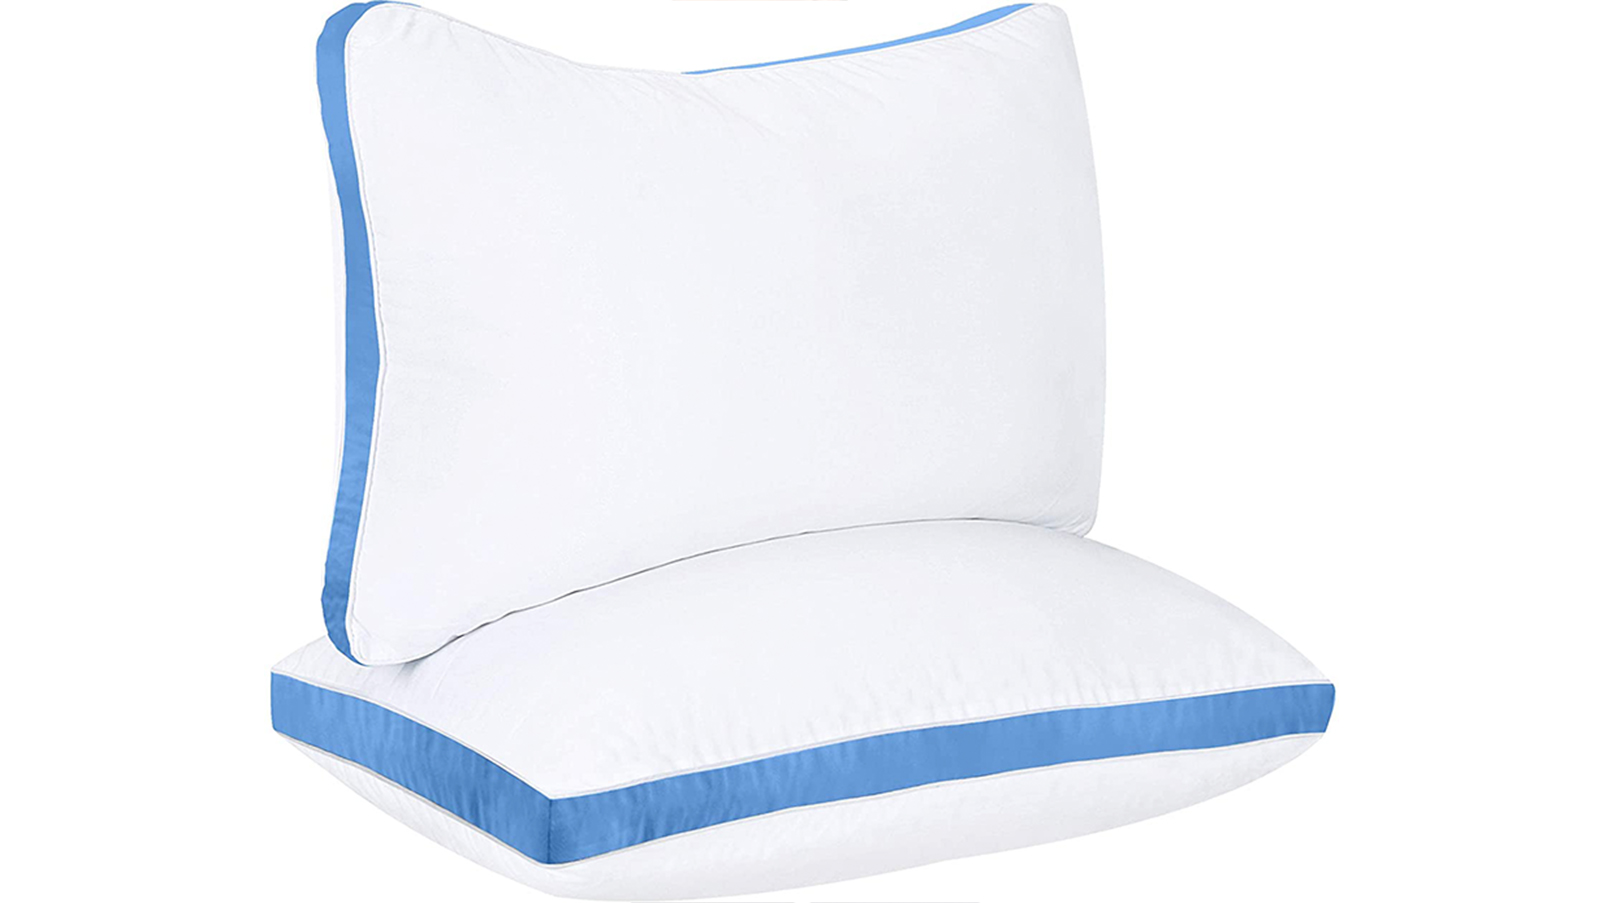 Utopia Bedding Gusseted Pillow (2-Pack)